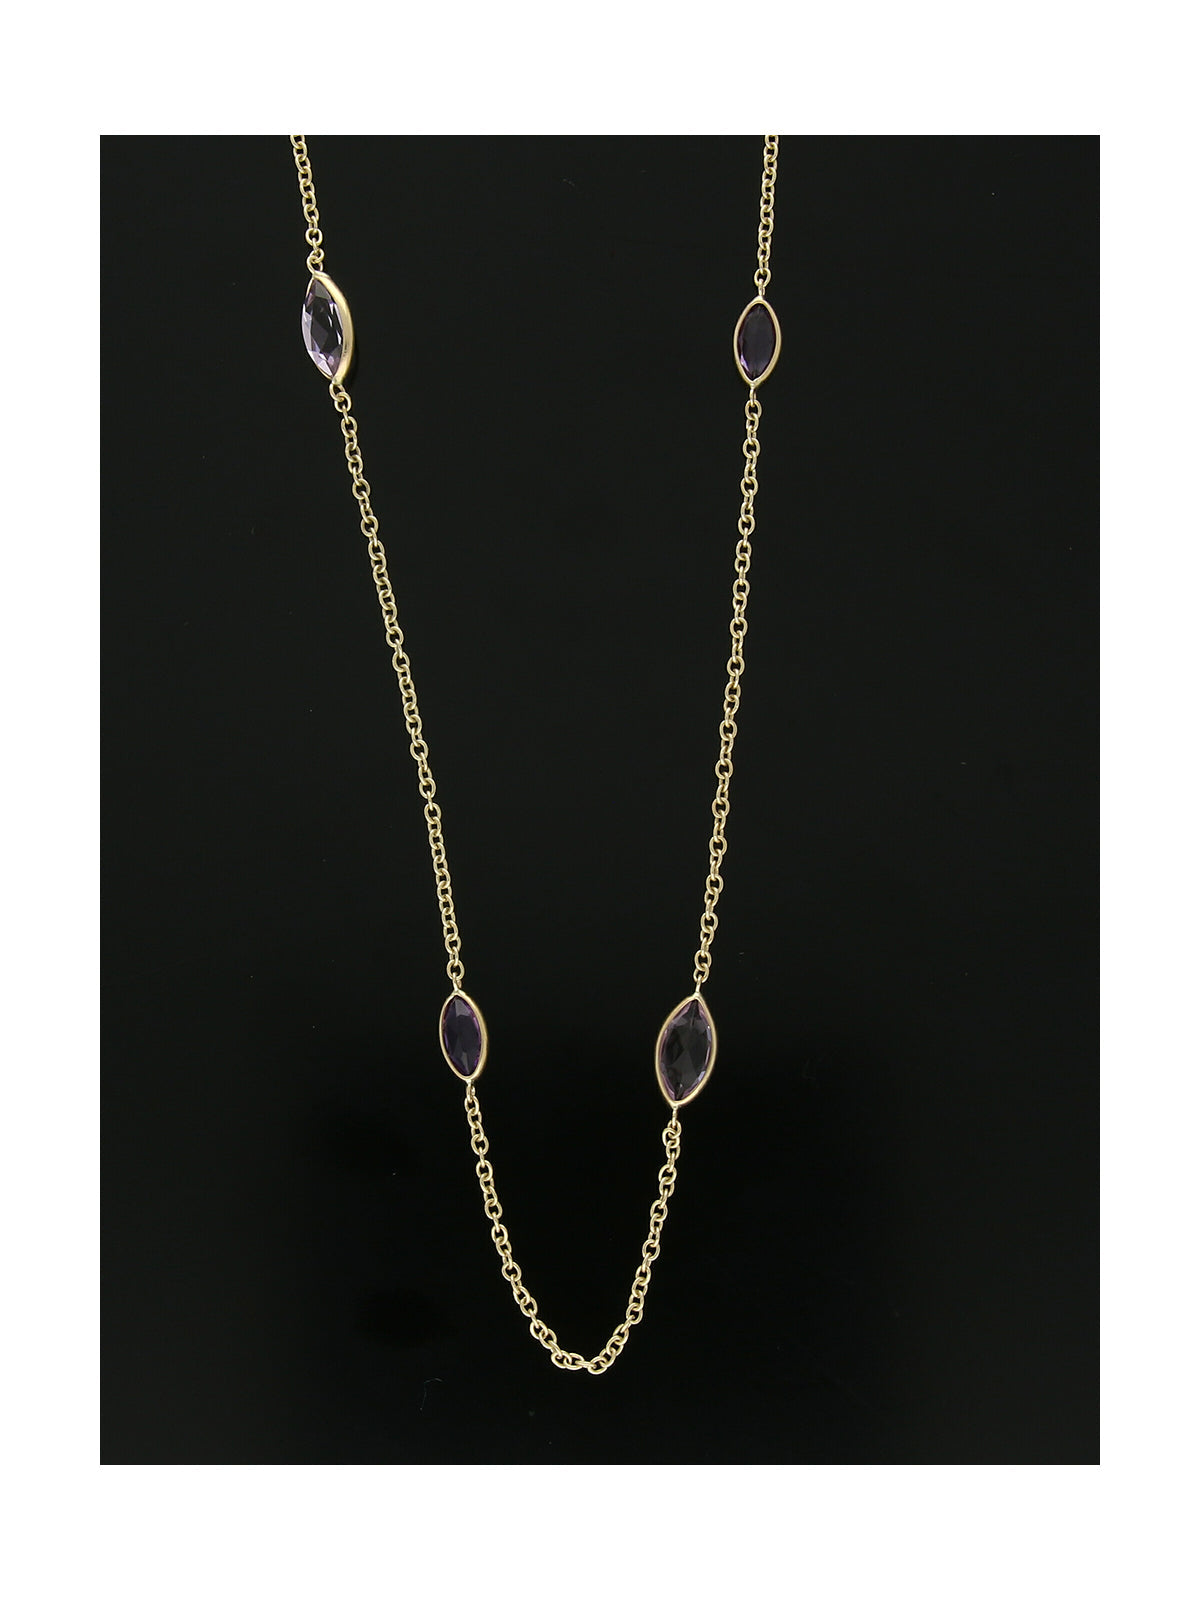 Amethyst Marquise Bead Necklace in 9ct Yellow Gold